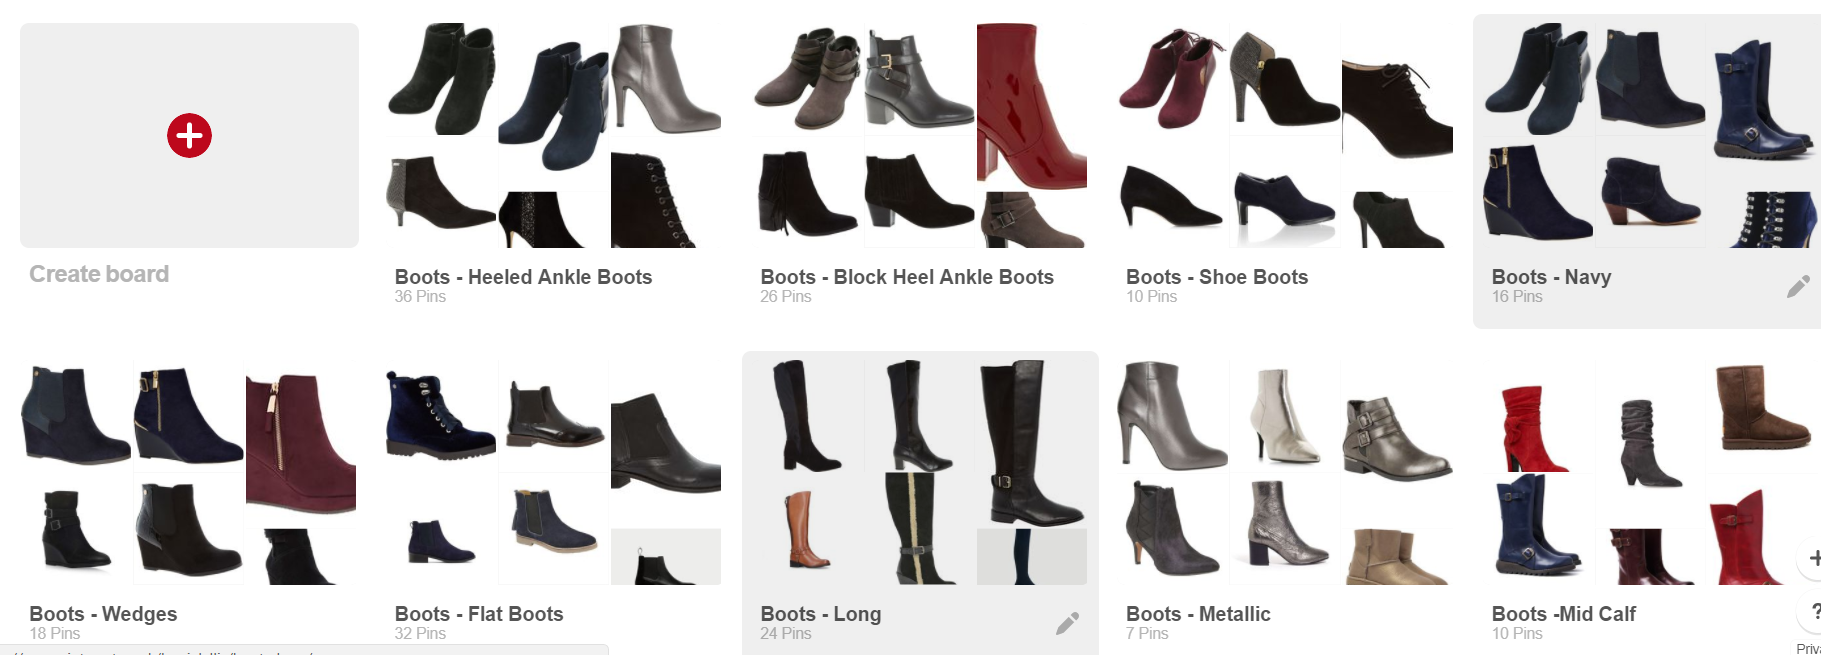 styles of boots cheap online